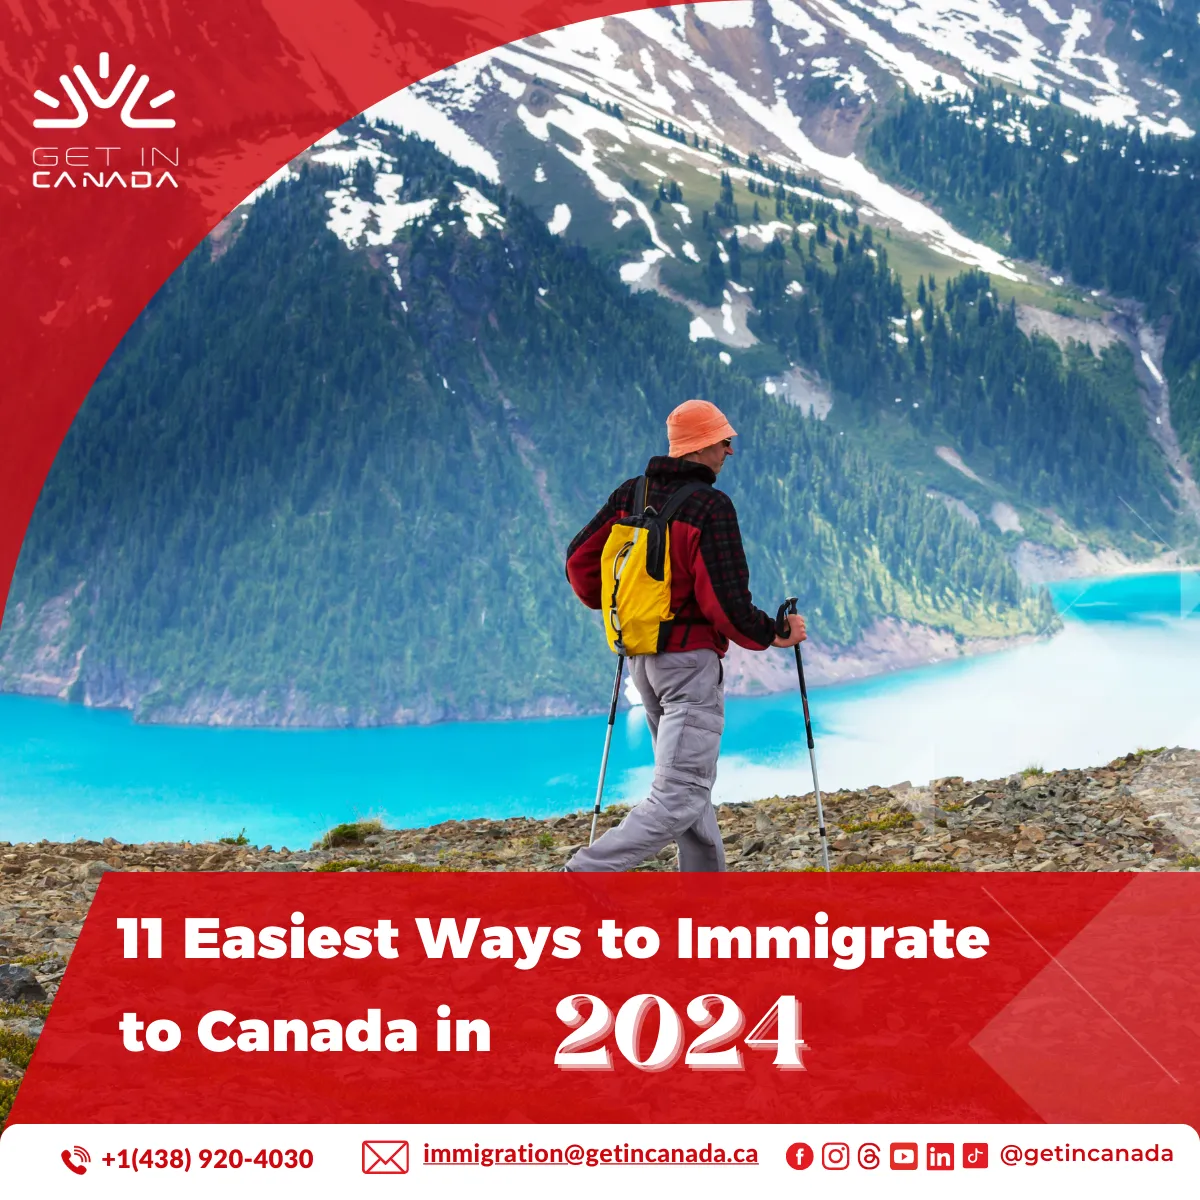 11 Easiest Ways to Immigrate to Canada in 2024, Immigration 2024, Canada, get in canada, 